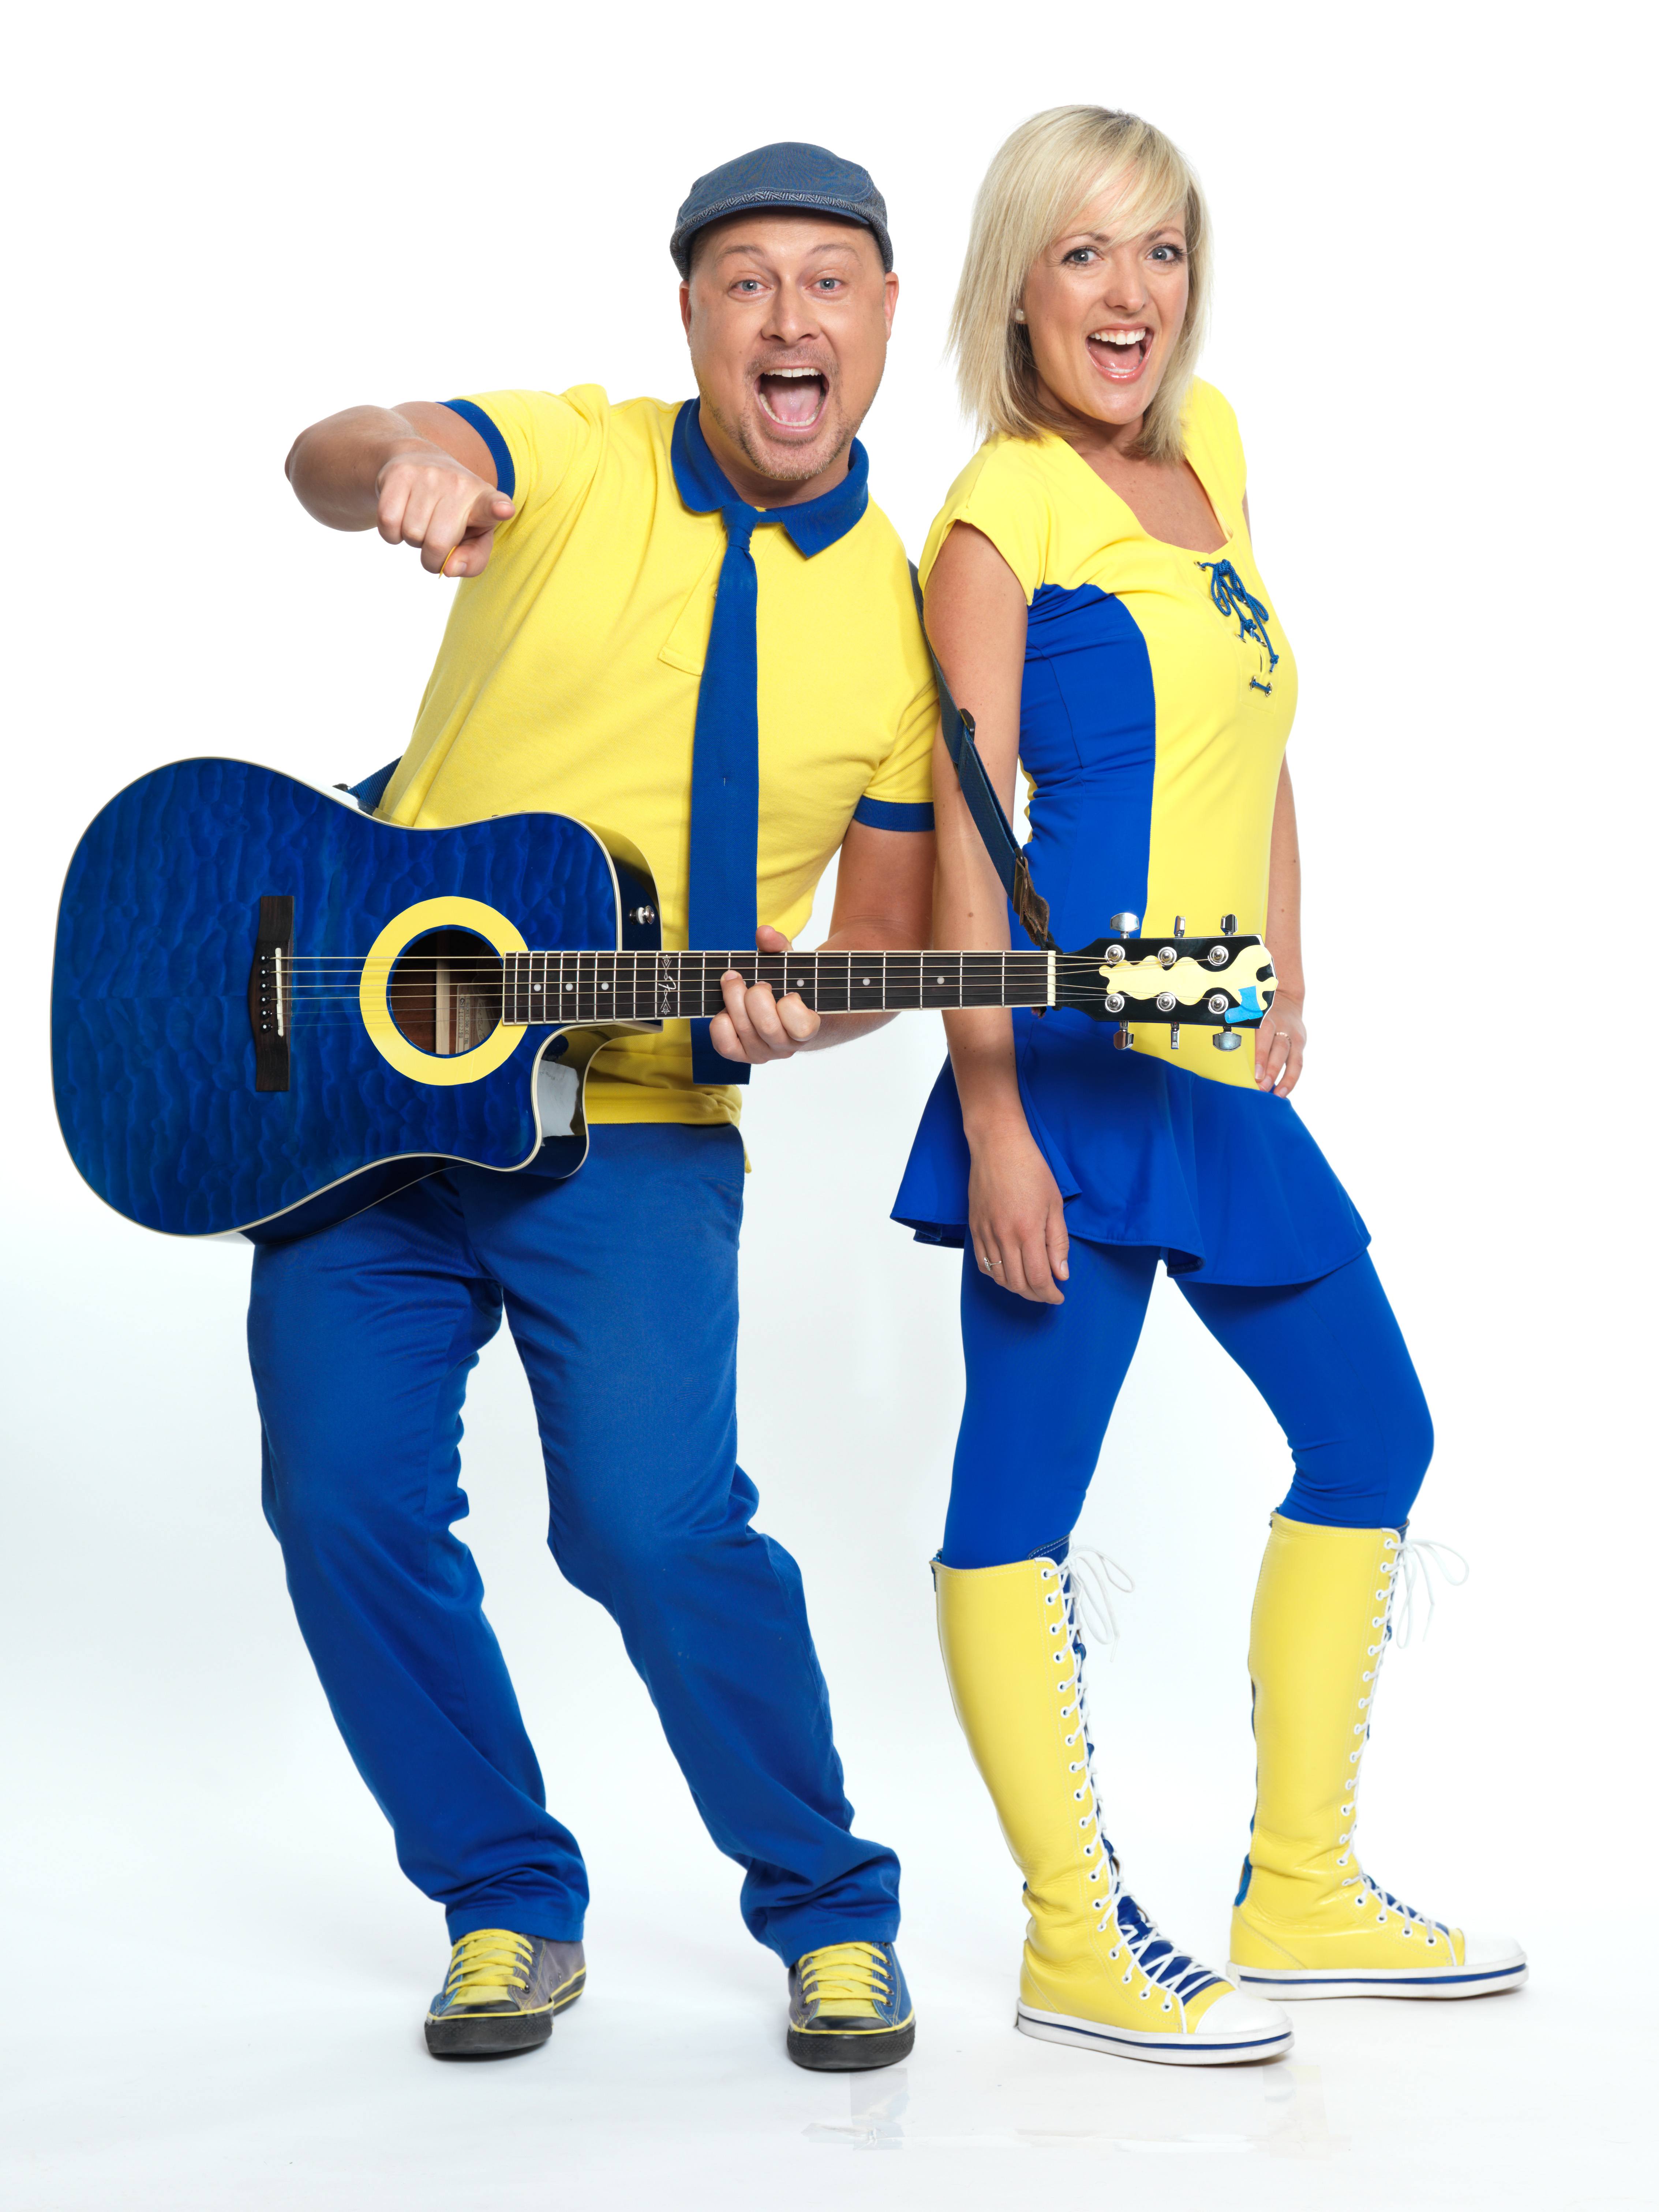 FAMILY FUN - Splash ‘N Boots brings their latest show ‘The Big Yellow Boot Tour’ to the Memorial Centre Sept. 22th.